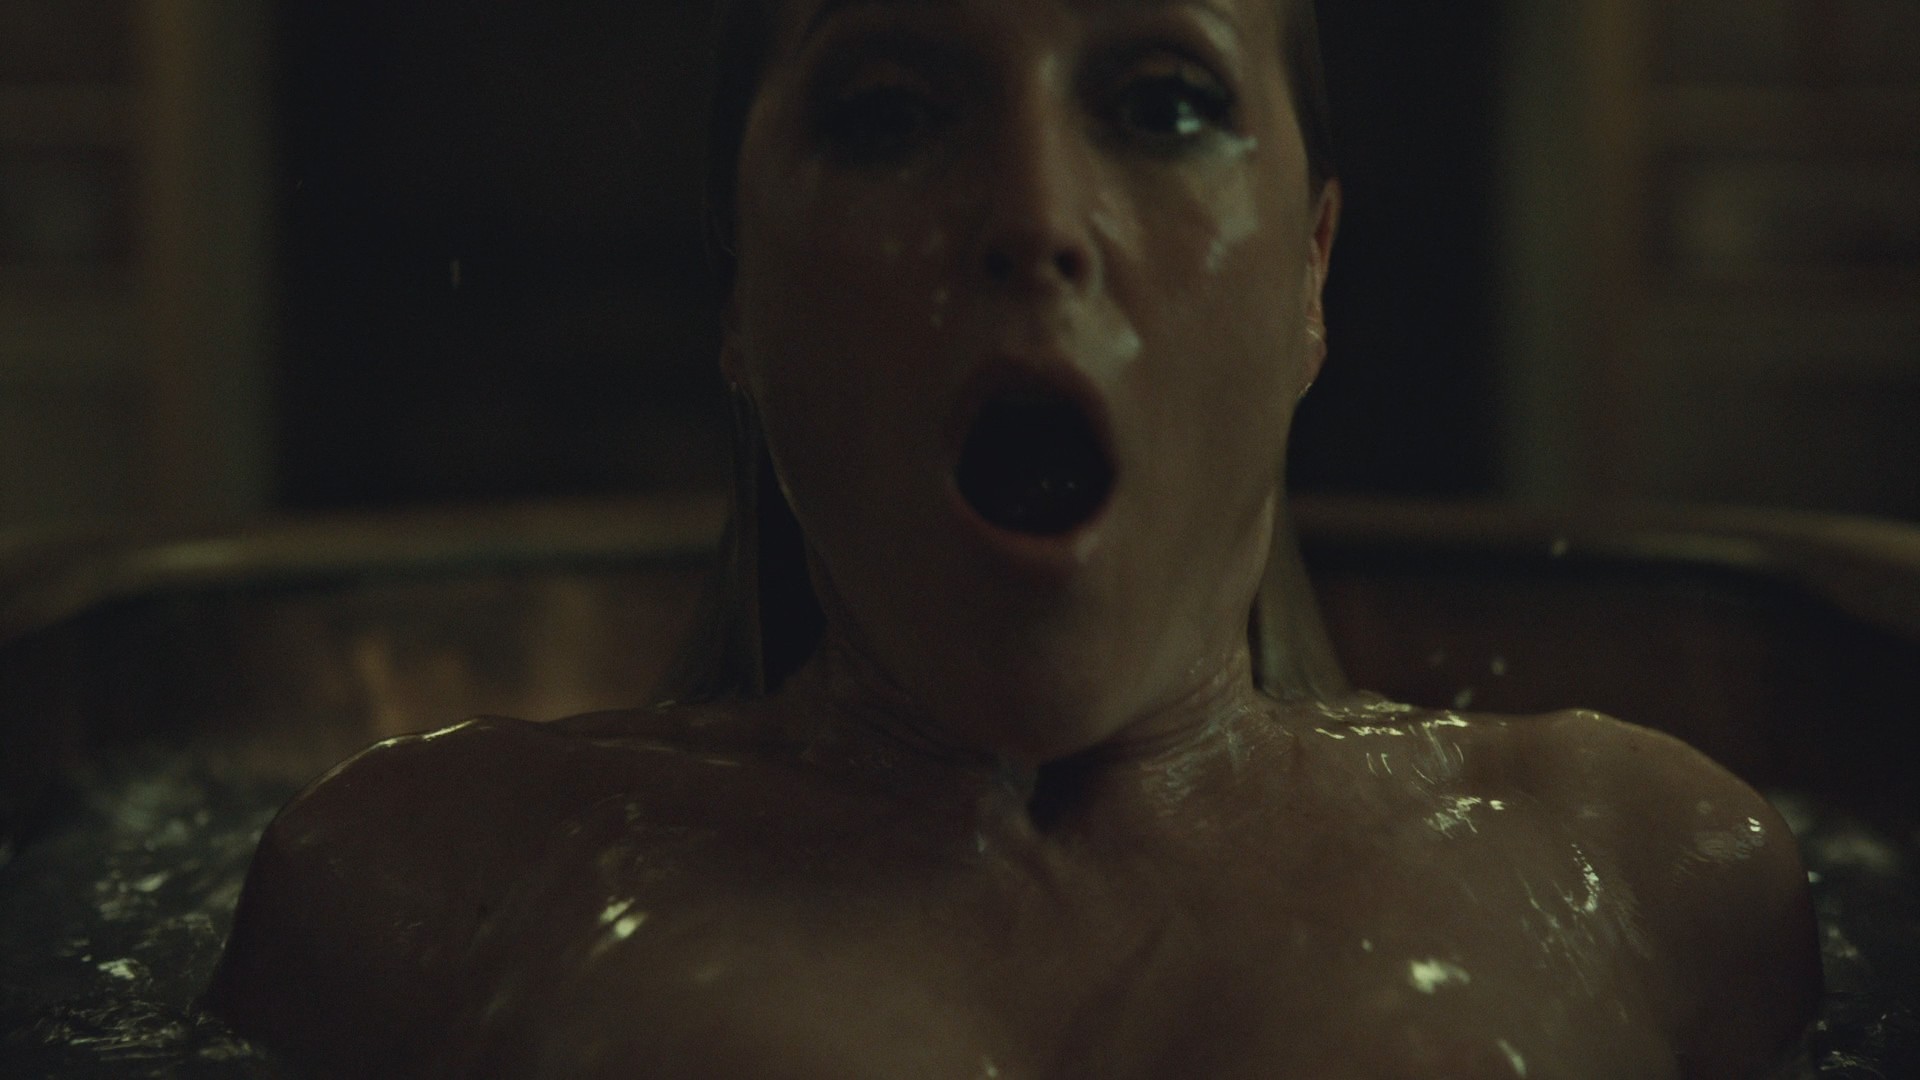 Naked Gillian Anderson In Hannibal Tv Show